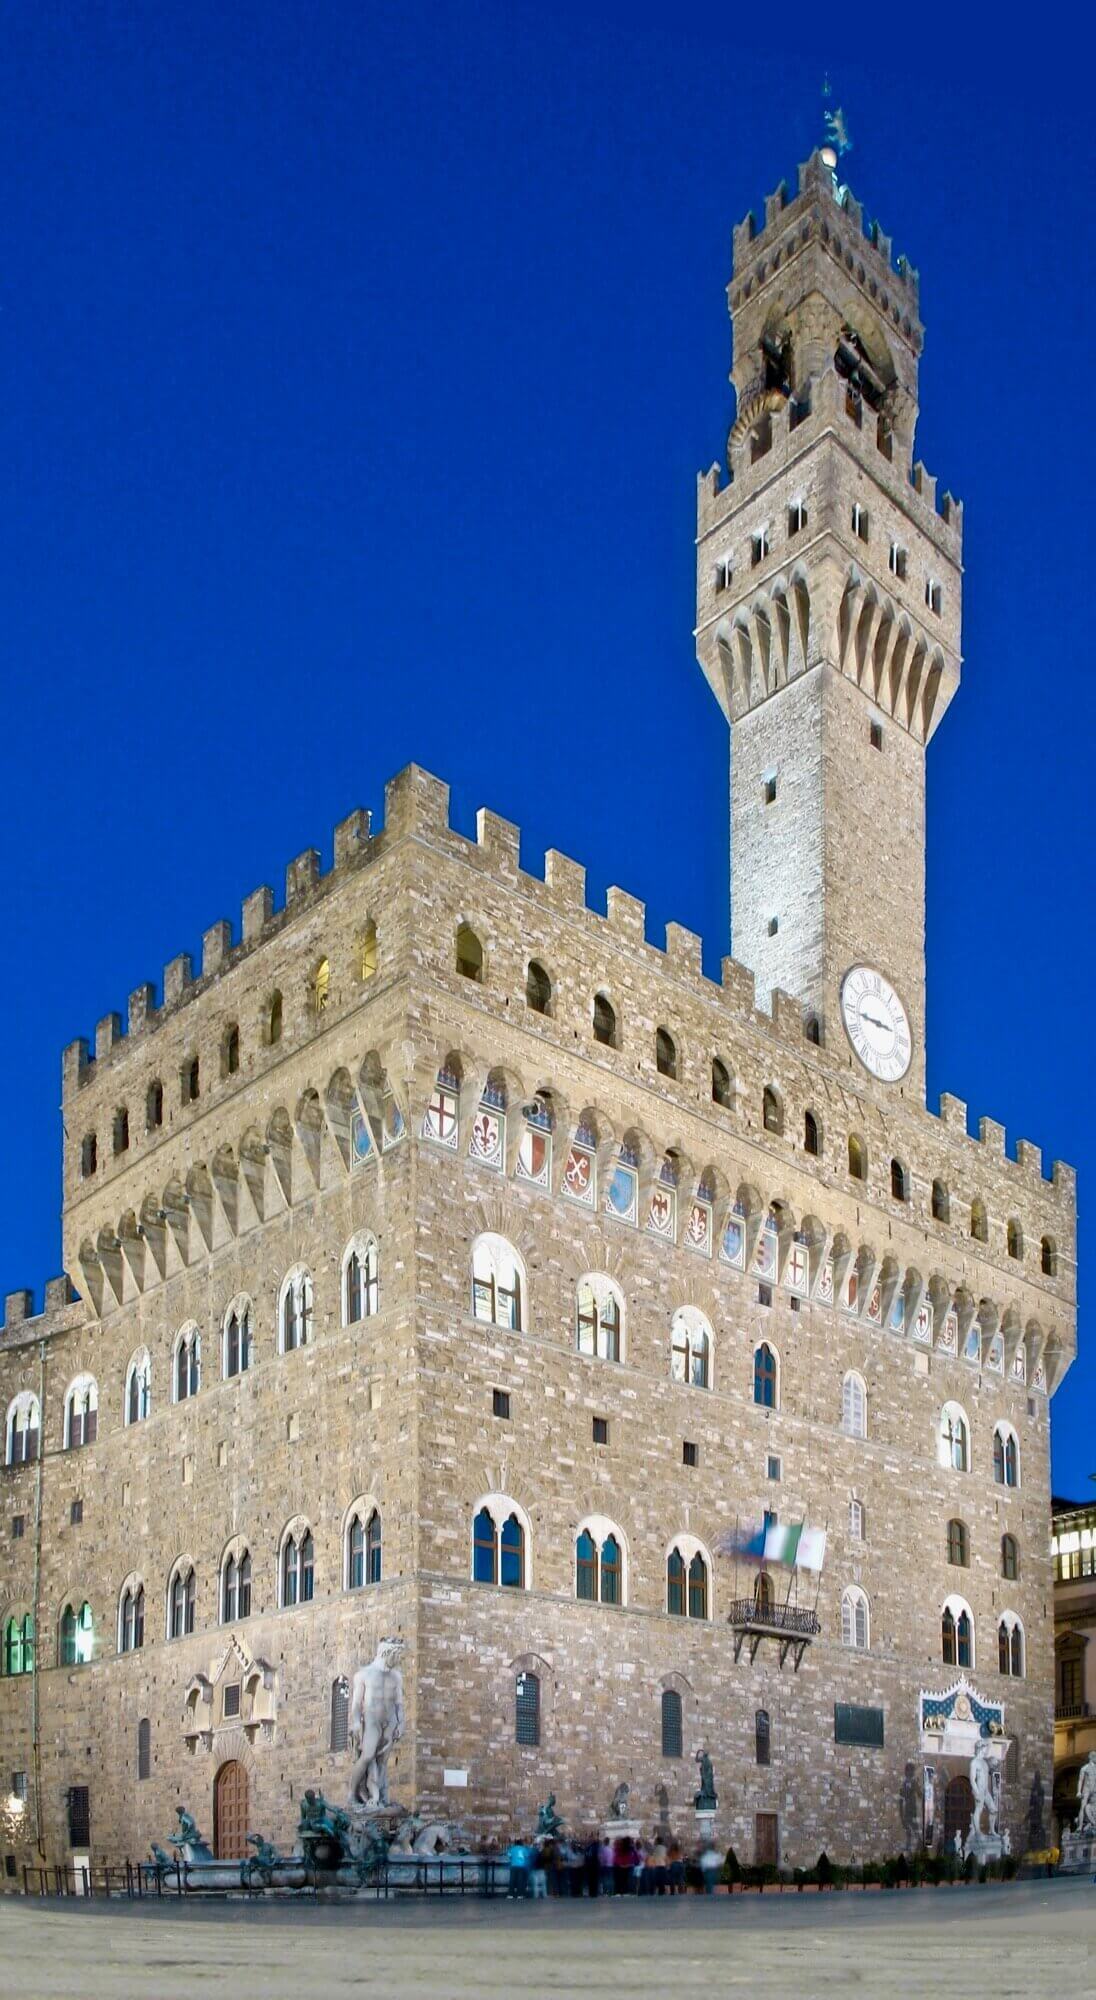 The castle-like Palazzo Vecchio in the heart of Florence, where Michelangelo's David originally stood